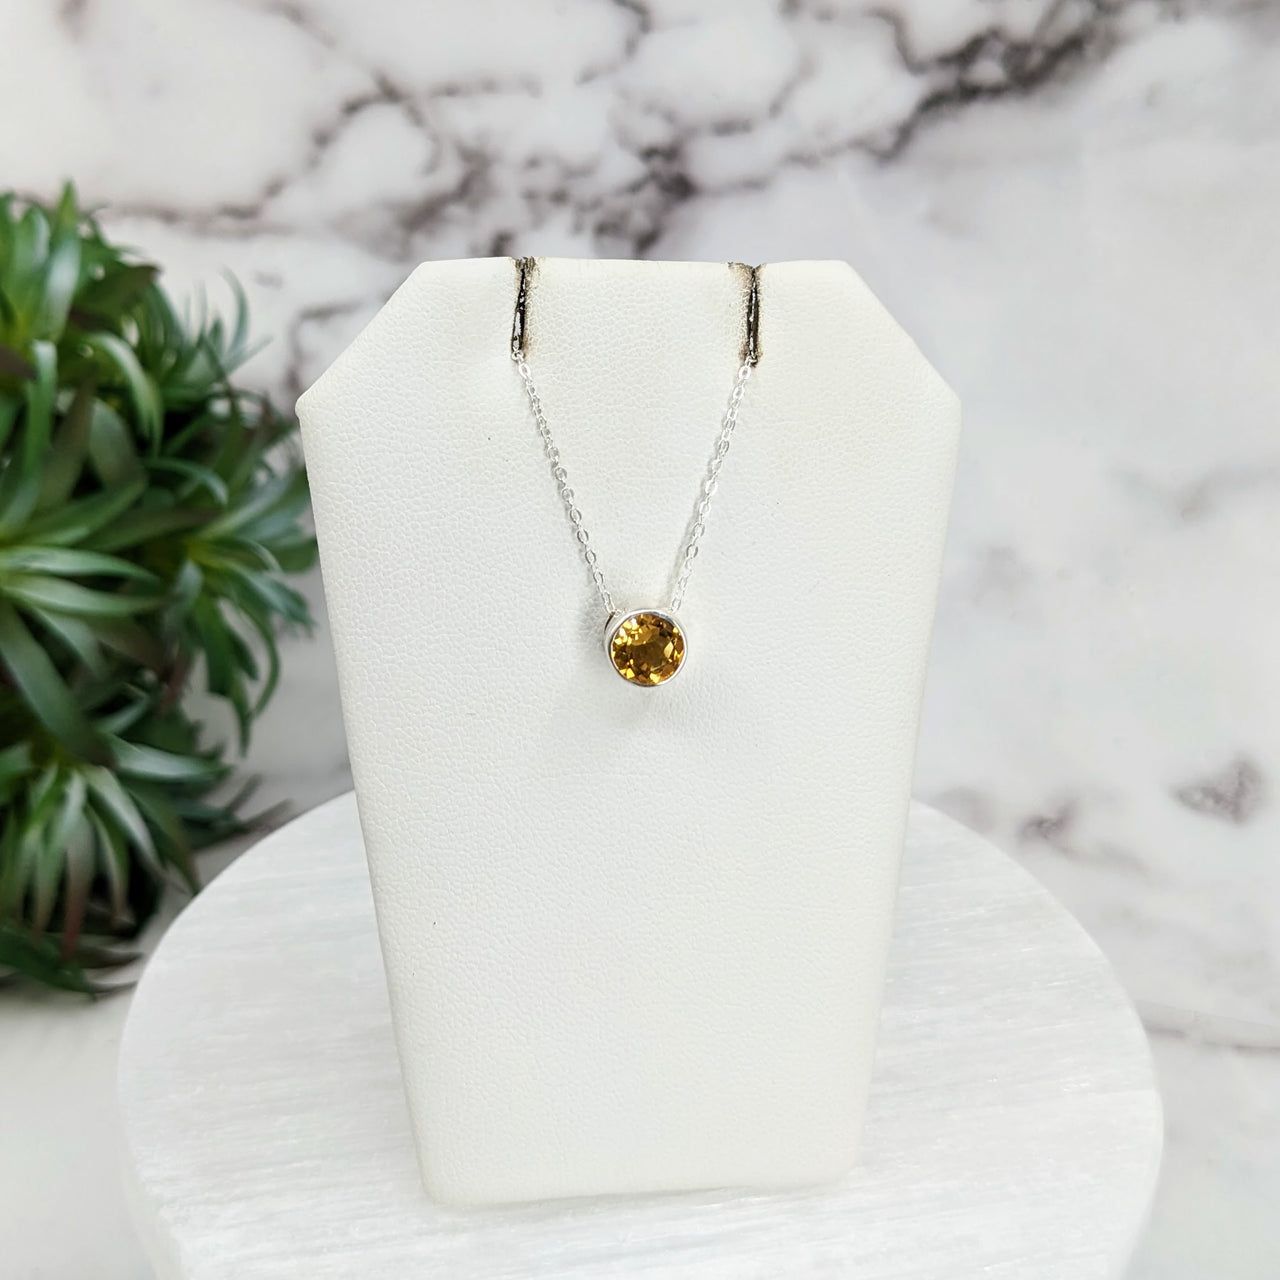 Citrine Faceted Necklace Sterling Silver Slider Pendant on 18" Chain #LV3249